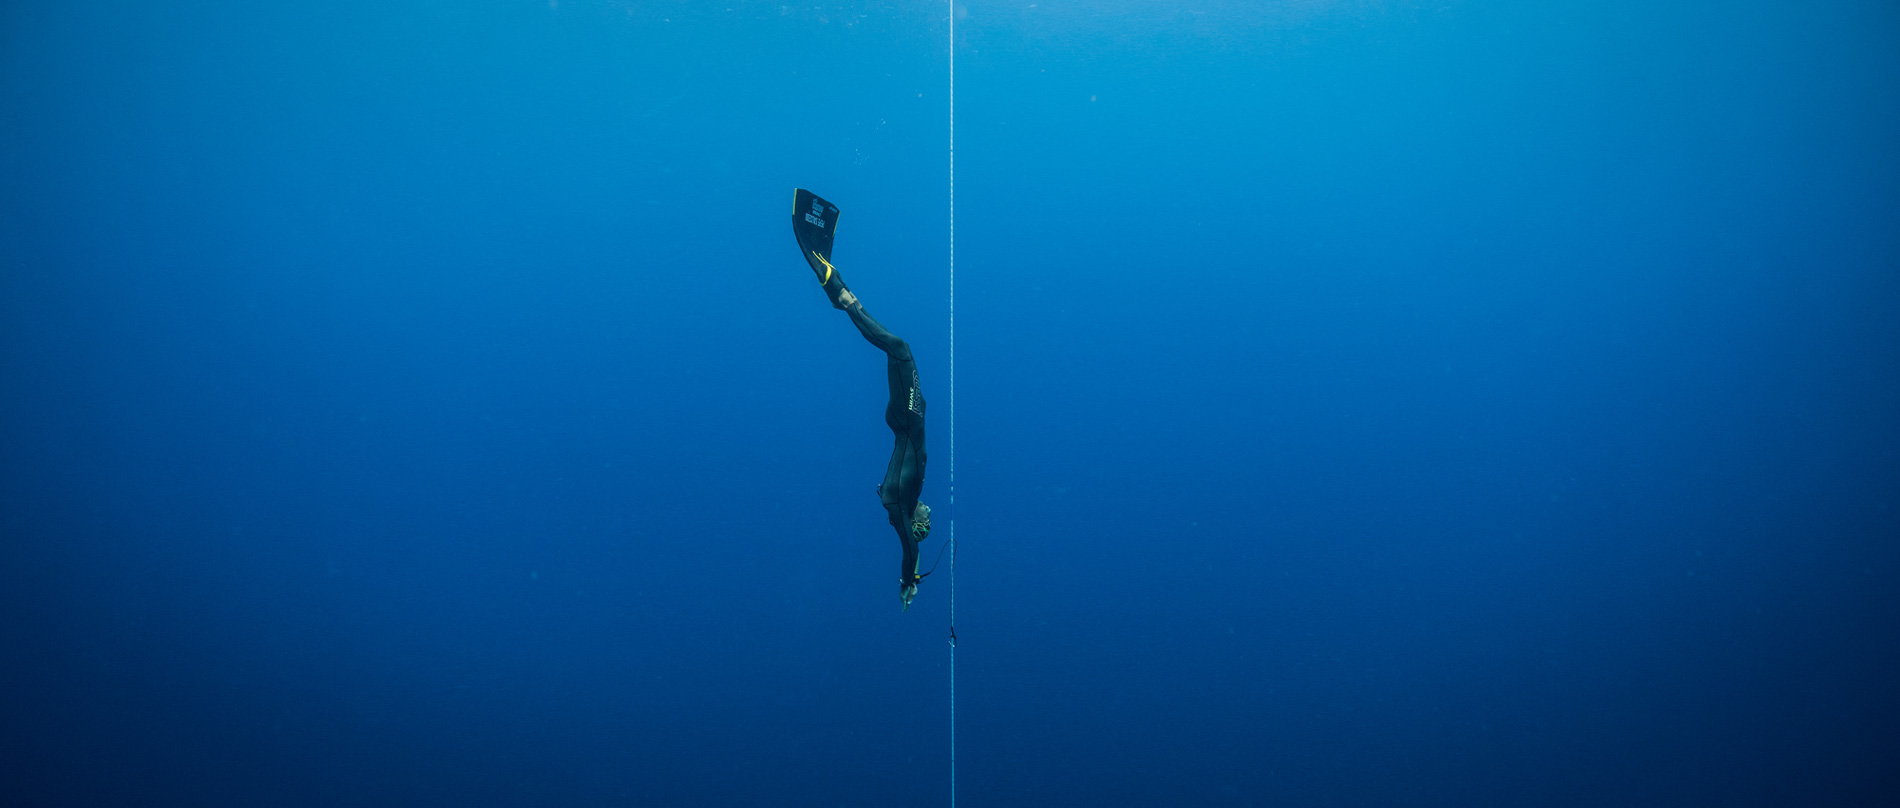 Freediving Competition